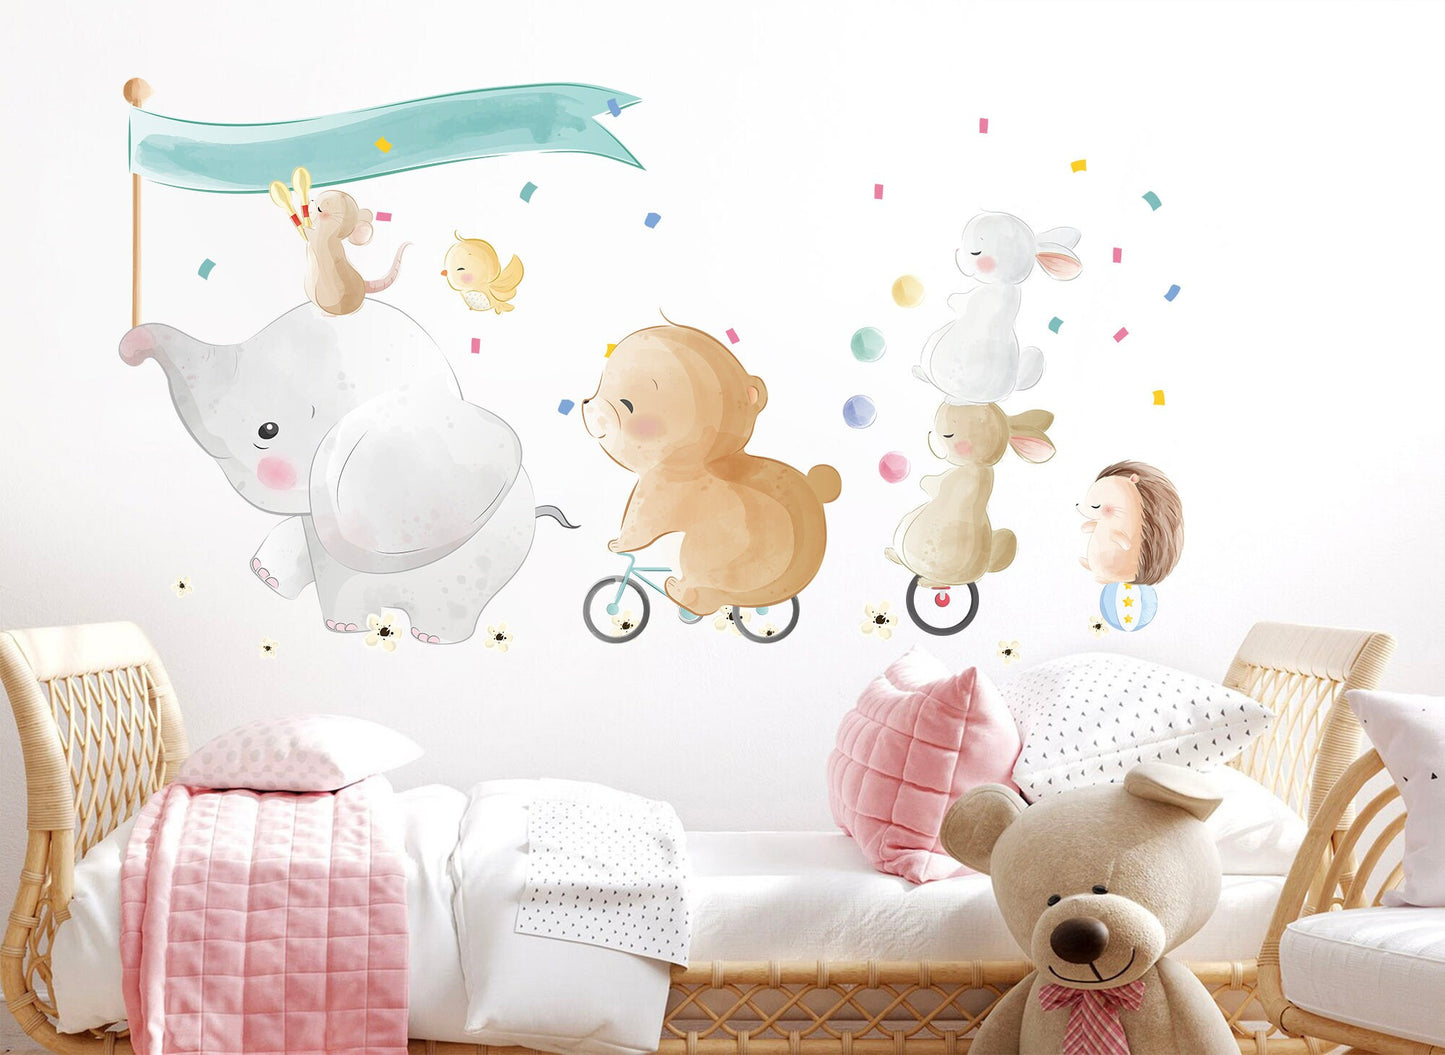 Whimsical Watercolor Circus Animal Wall Decals - Elephant, Bear, Rabbit, Hedgehog Performers - Kids Room Decor - BR093